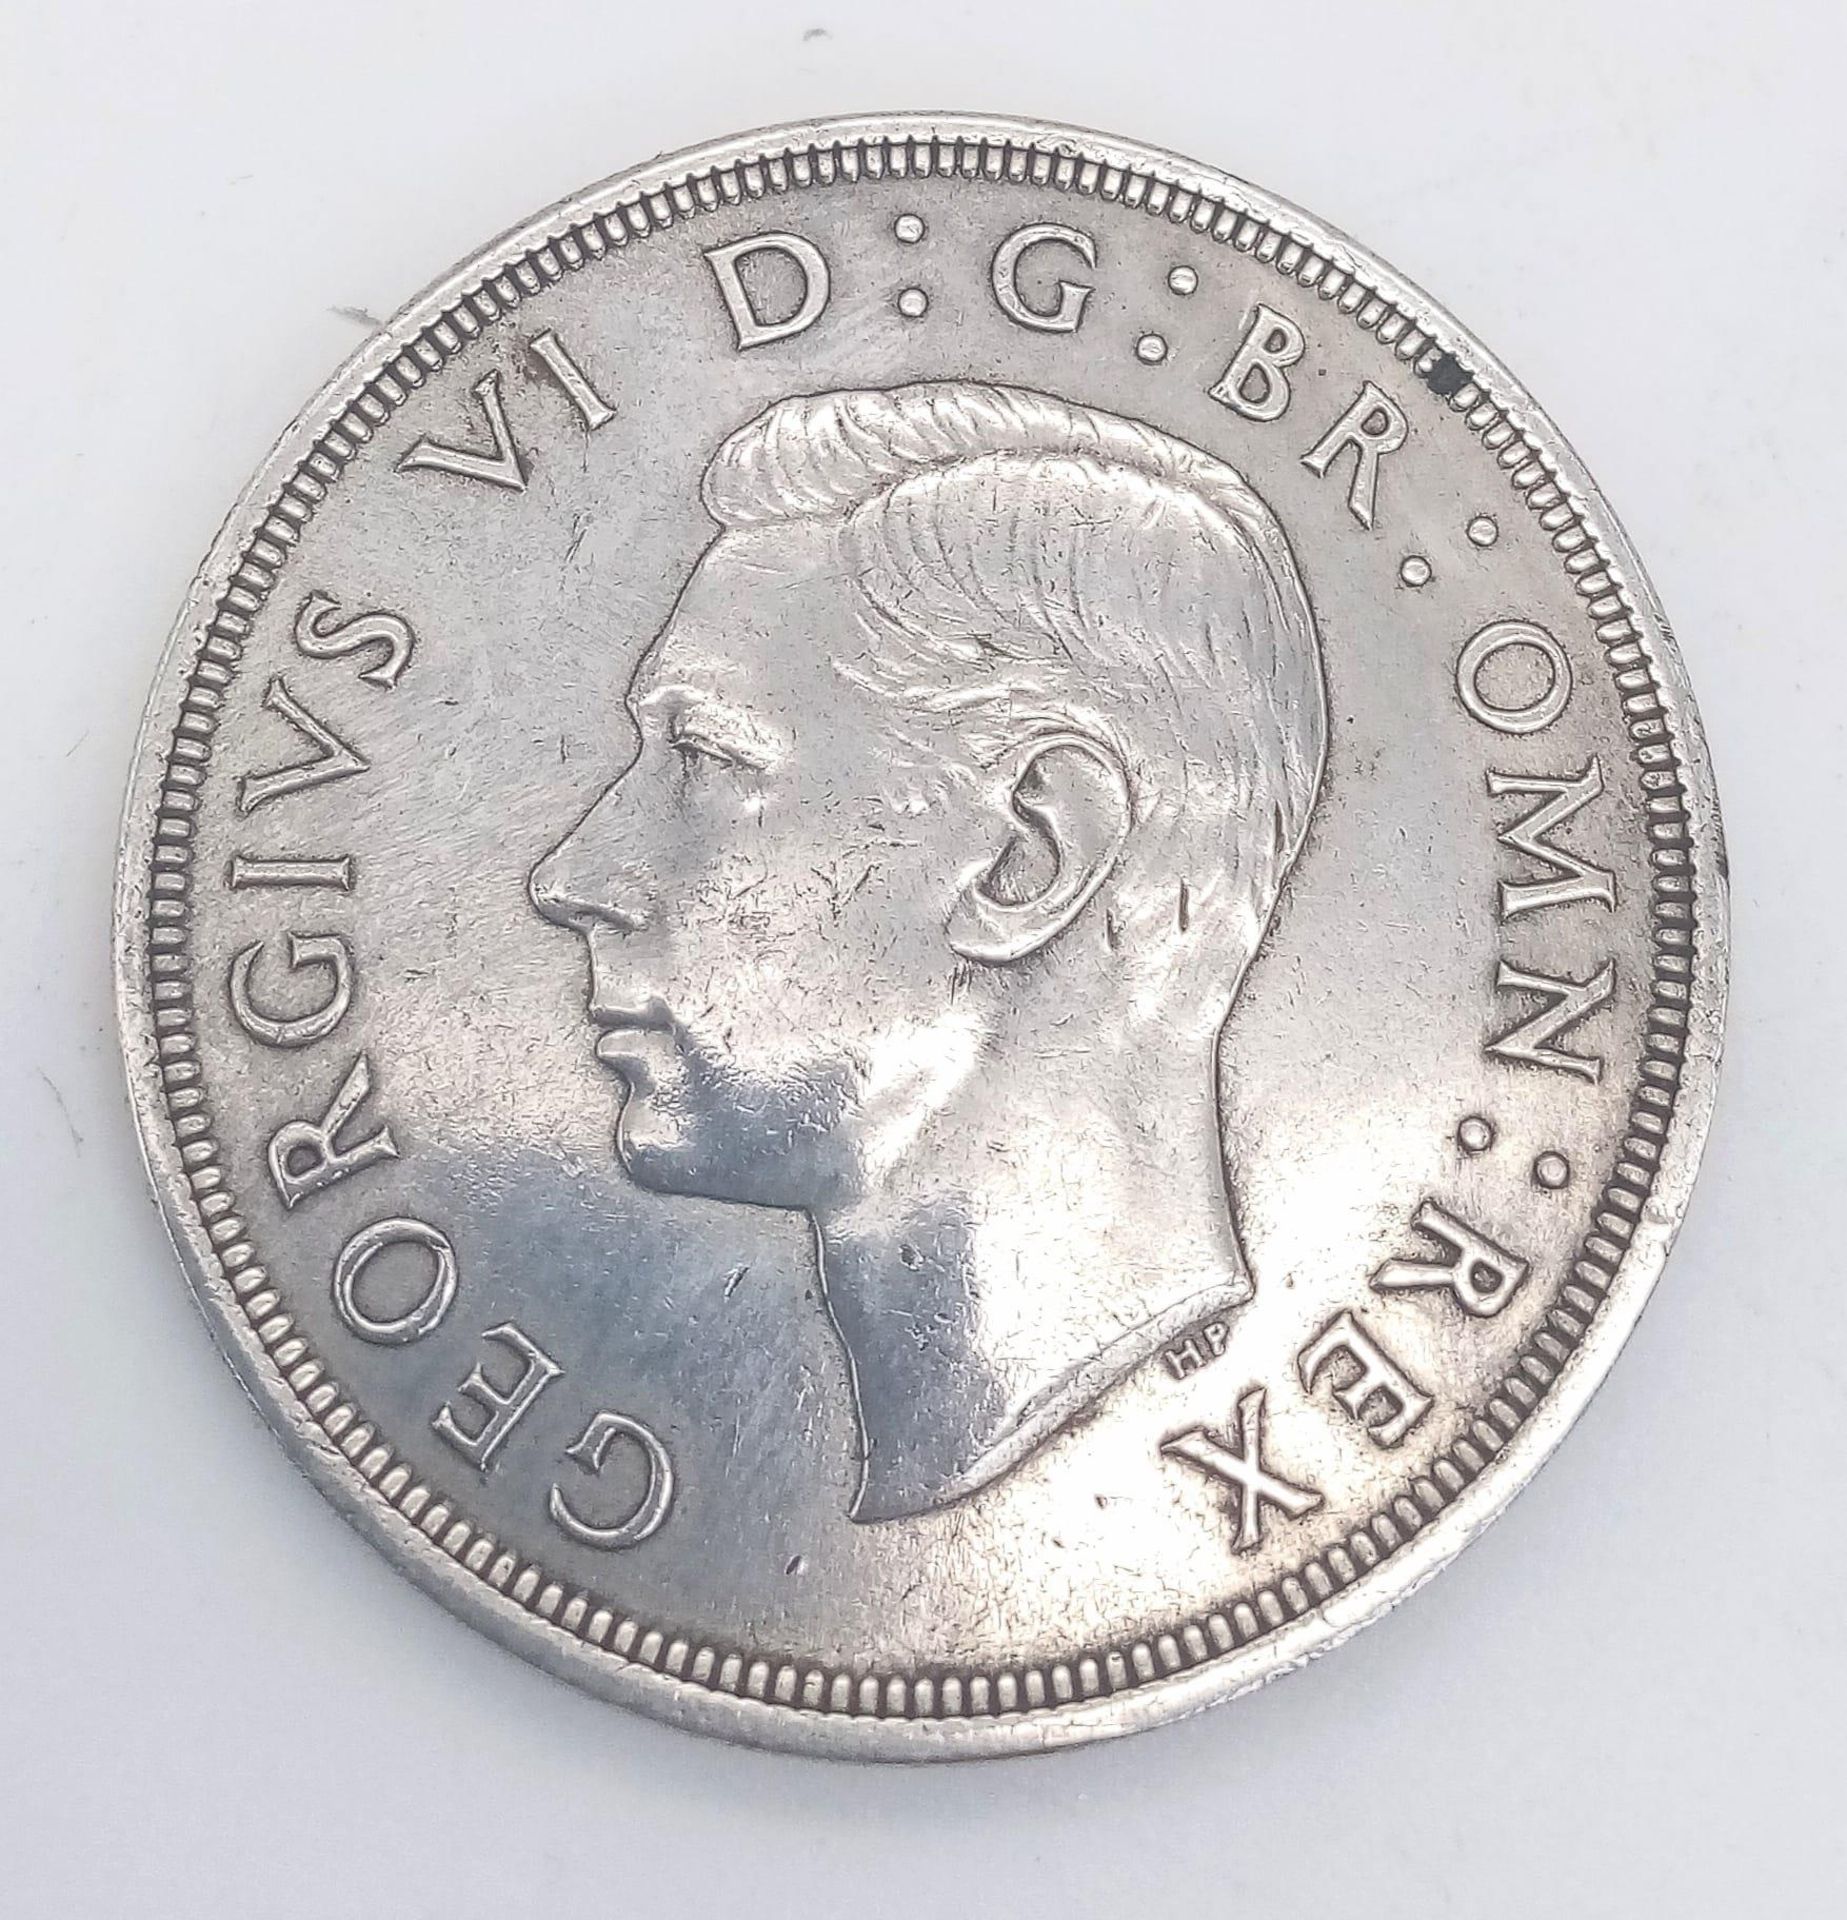 A GEORGE VI CROWN DATED 1937 IN GOOD CONDITION. - Image 2 of 3